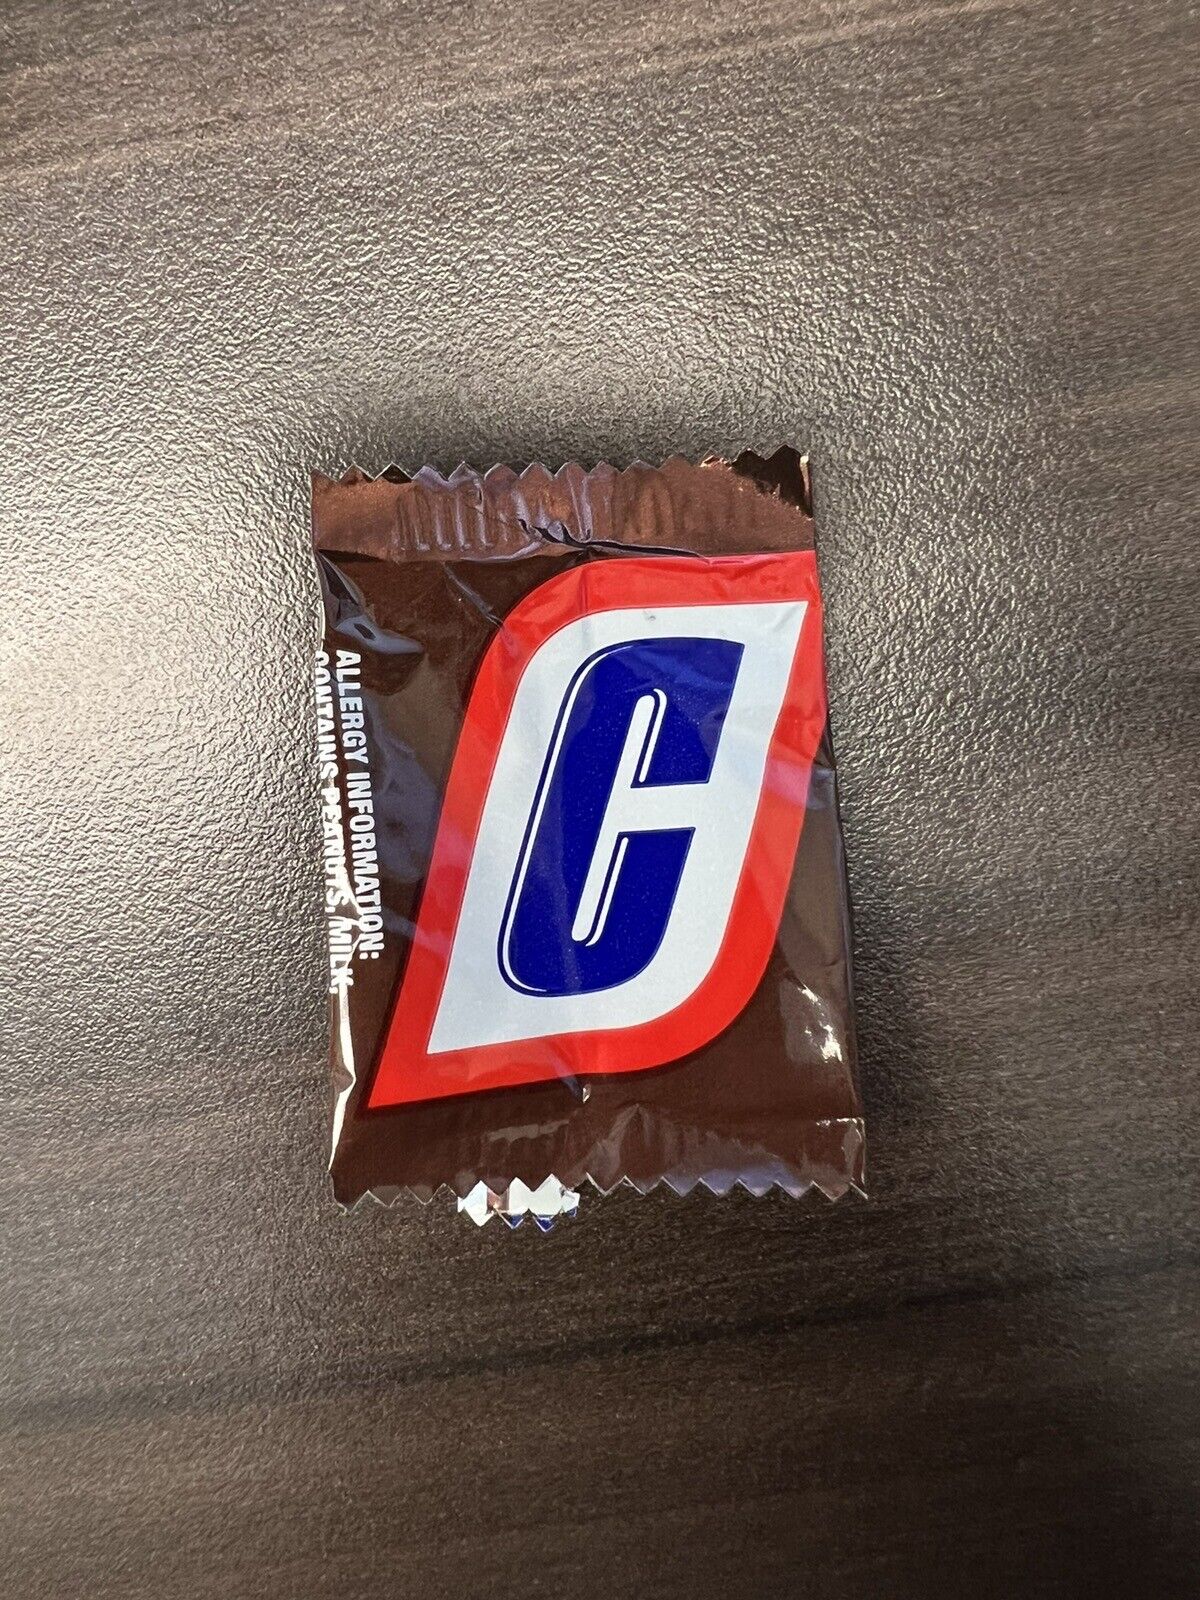 Factory Defect EMPTY Unopened Snickers Mini Candy Wrapper: C on Cover